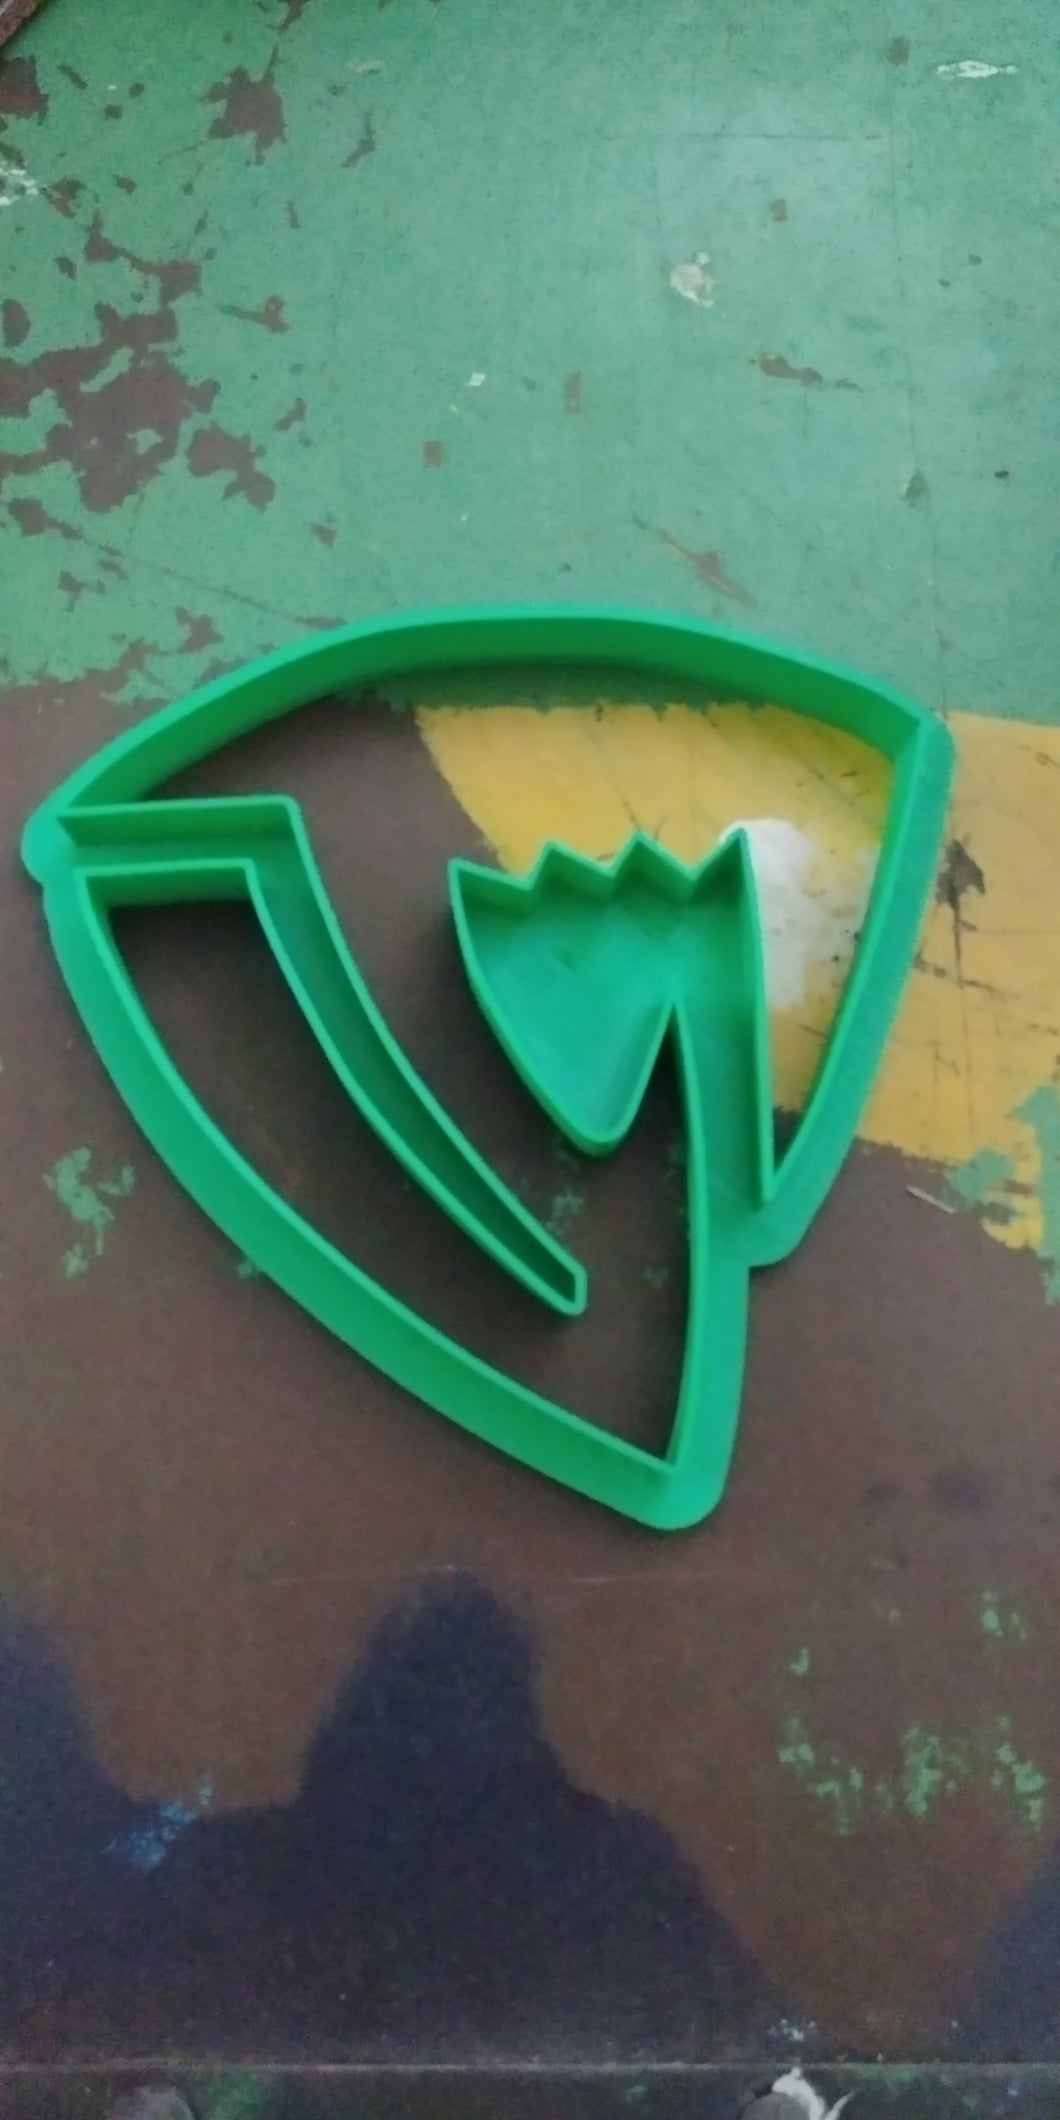 3D Printed Cookie Cutter Inspired by Fairy Tail Sabertooth Guild Crest